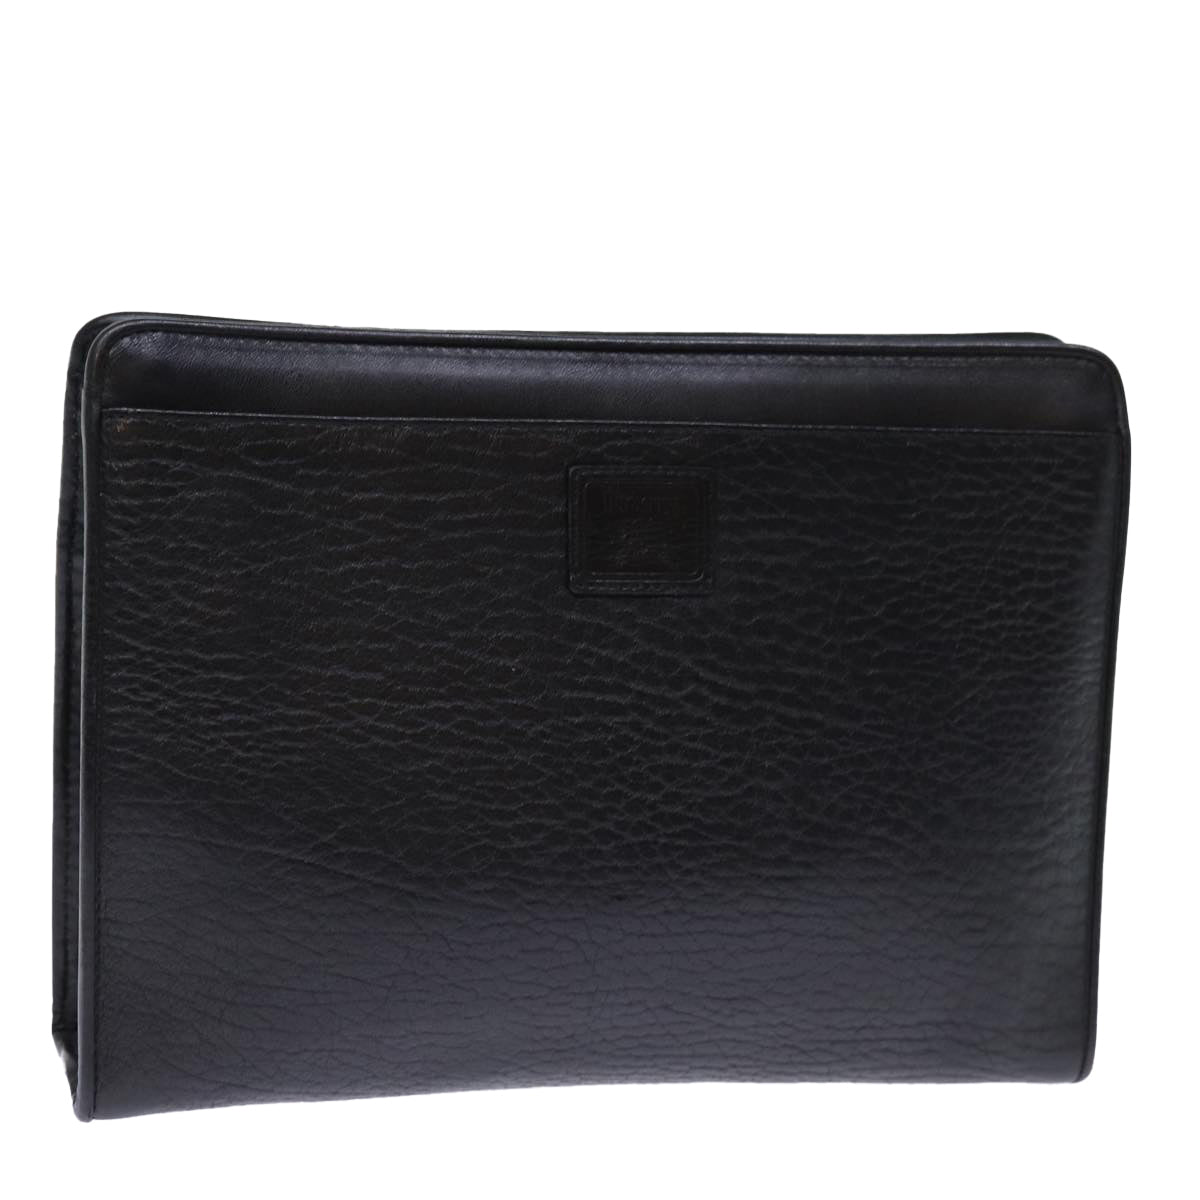 Burberrys Clutch Bag Leather Black Auth bs14320